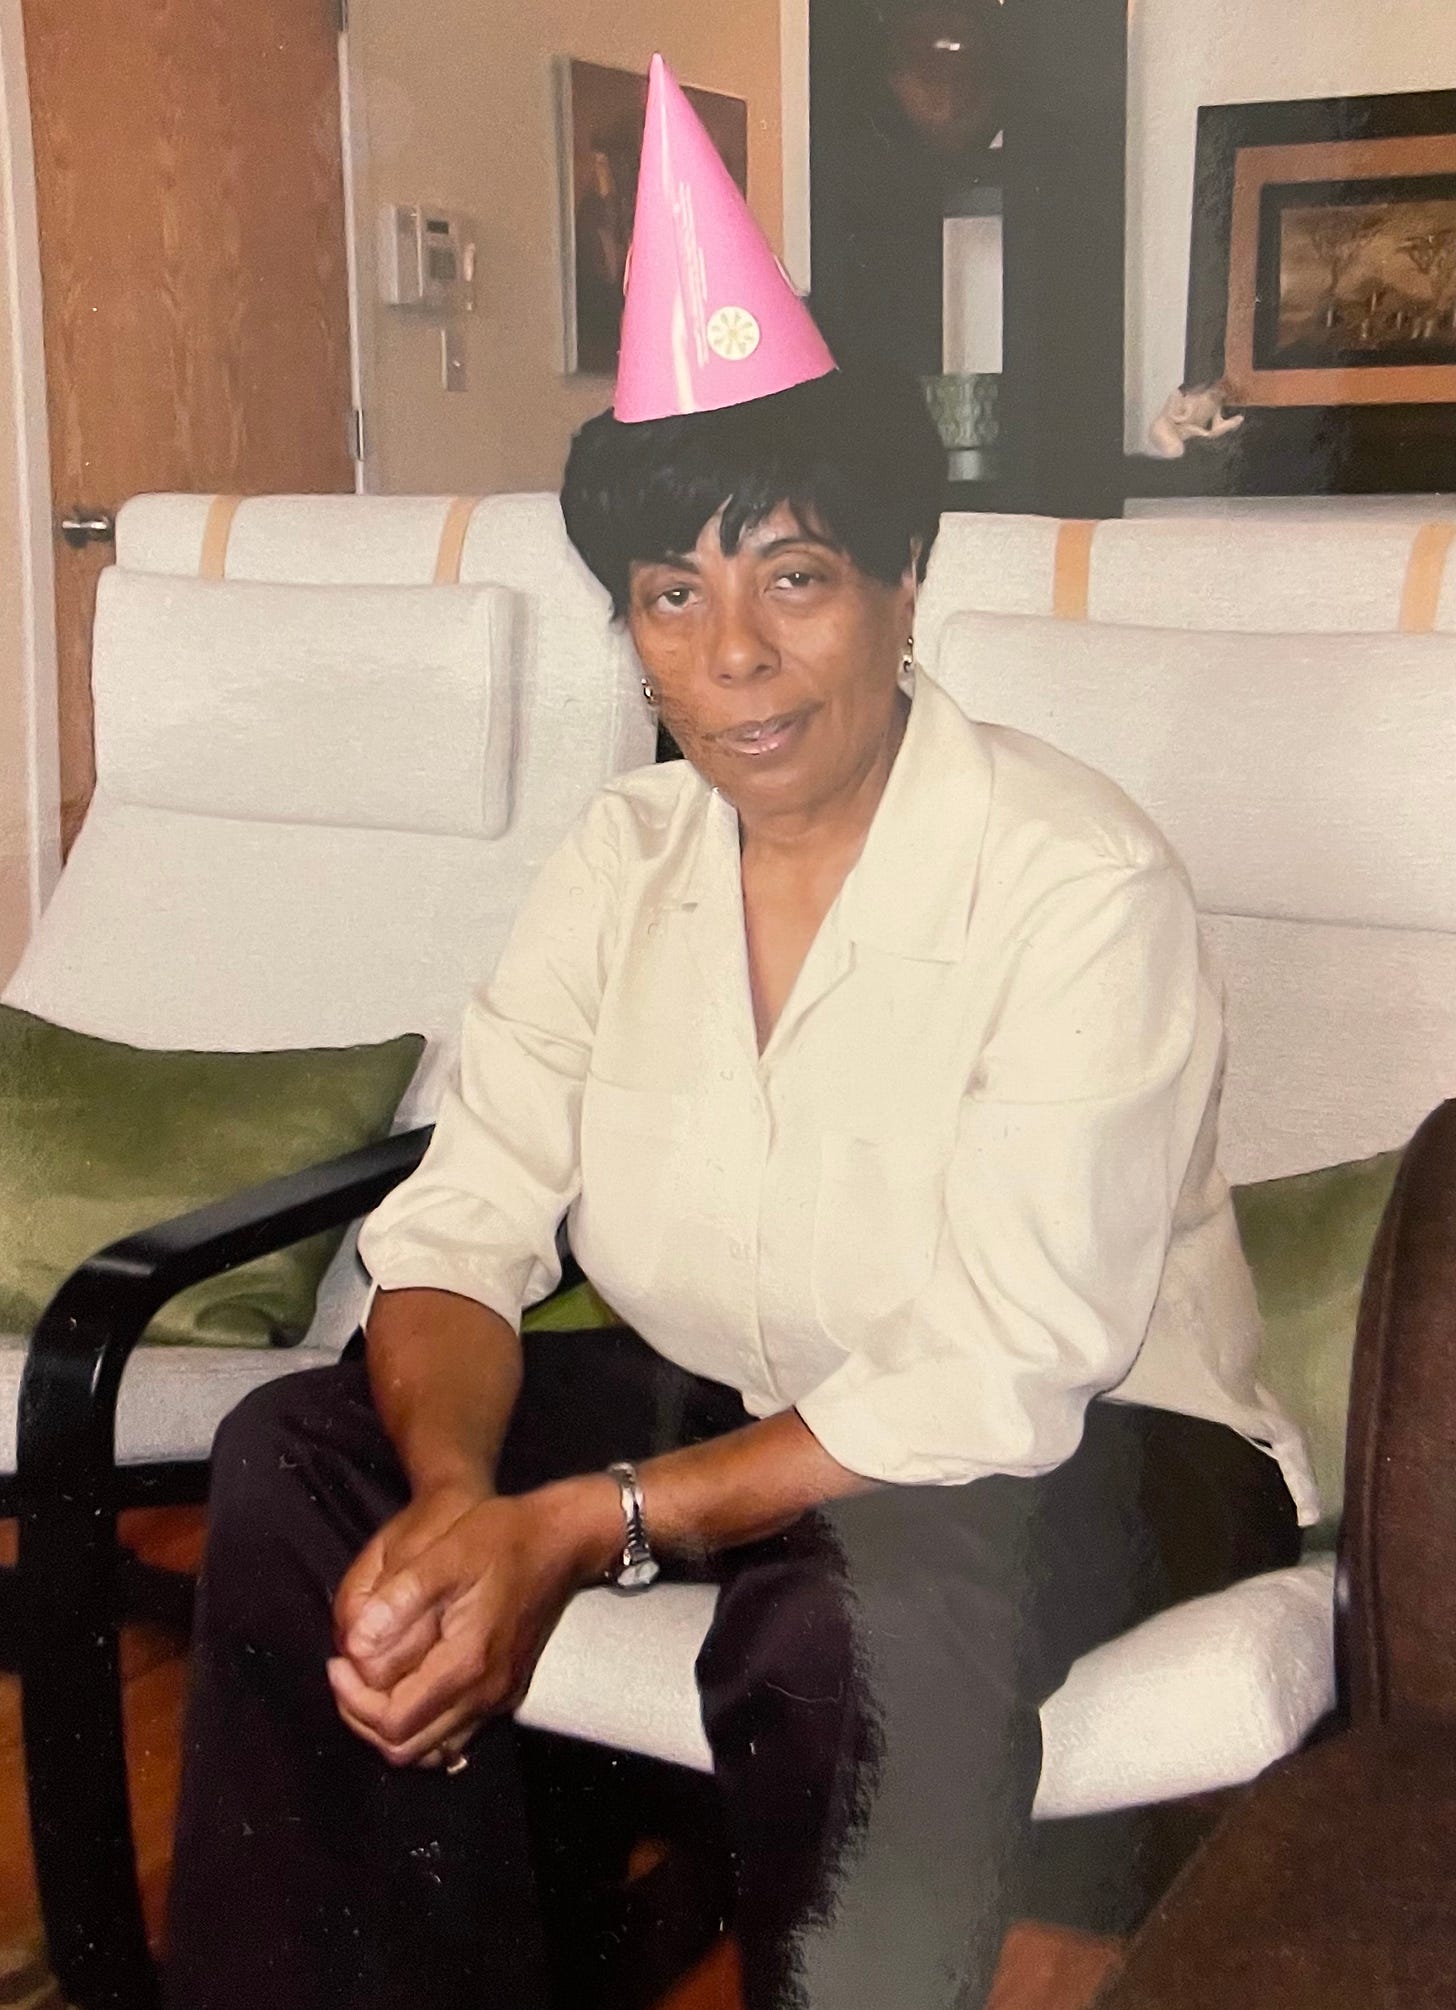 Jemar's mom sitting down with a pink party hat on her head